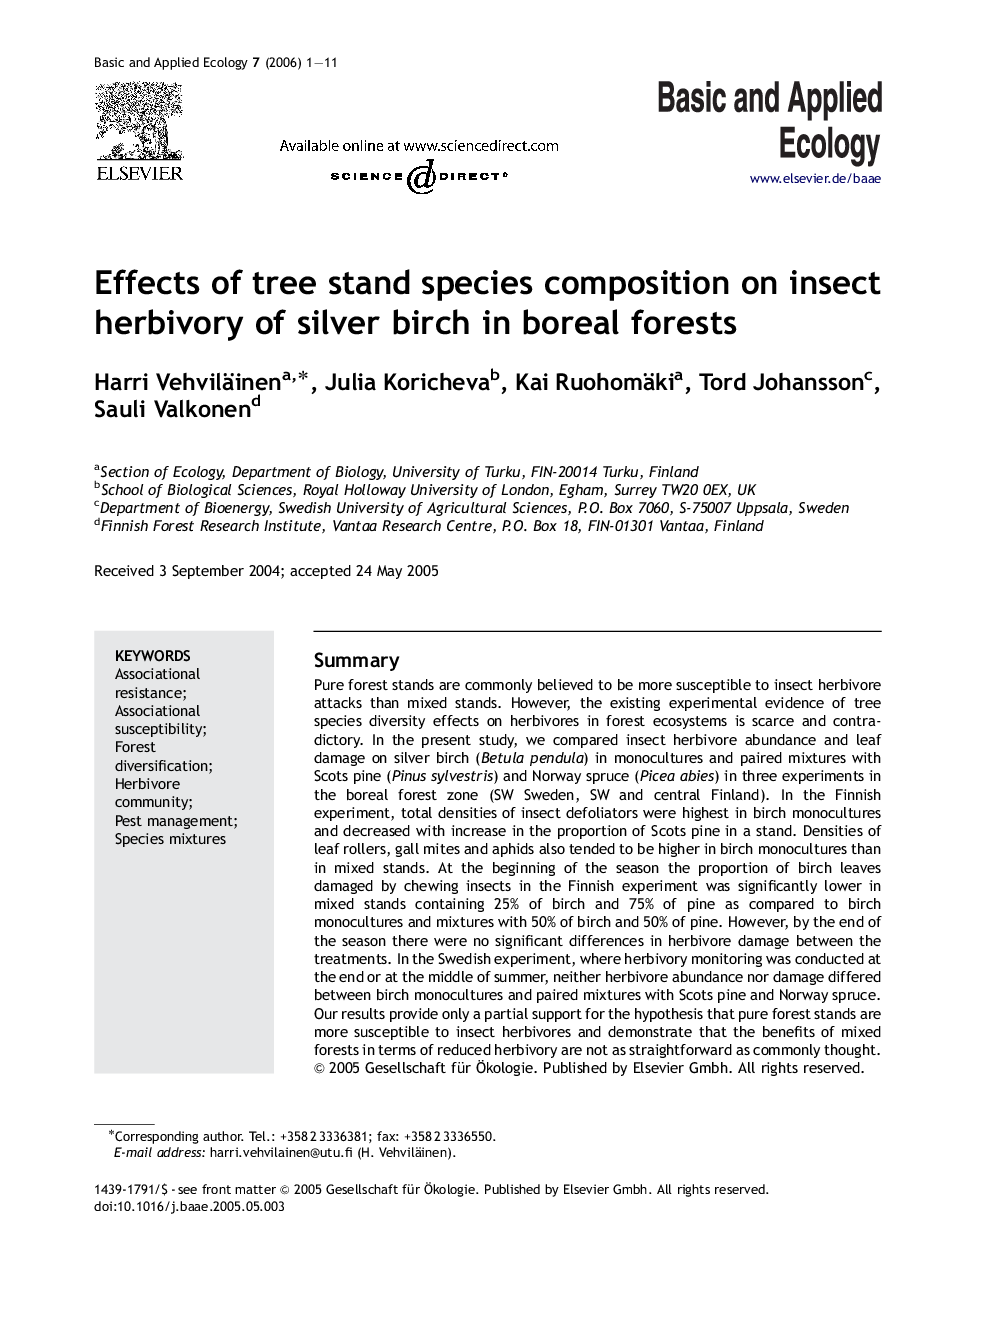 Effects of tree stand species composition on insect herbivory of silver birch in boreal forests